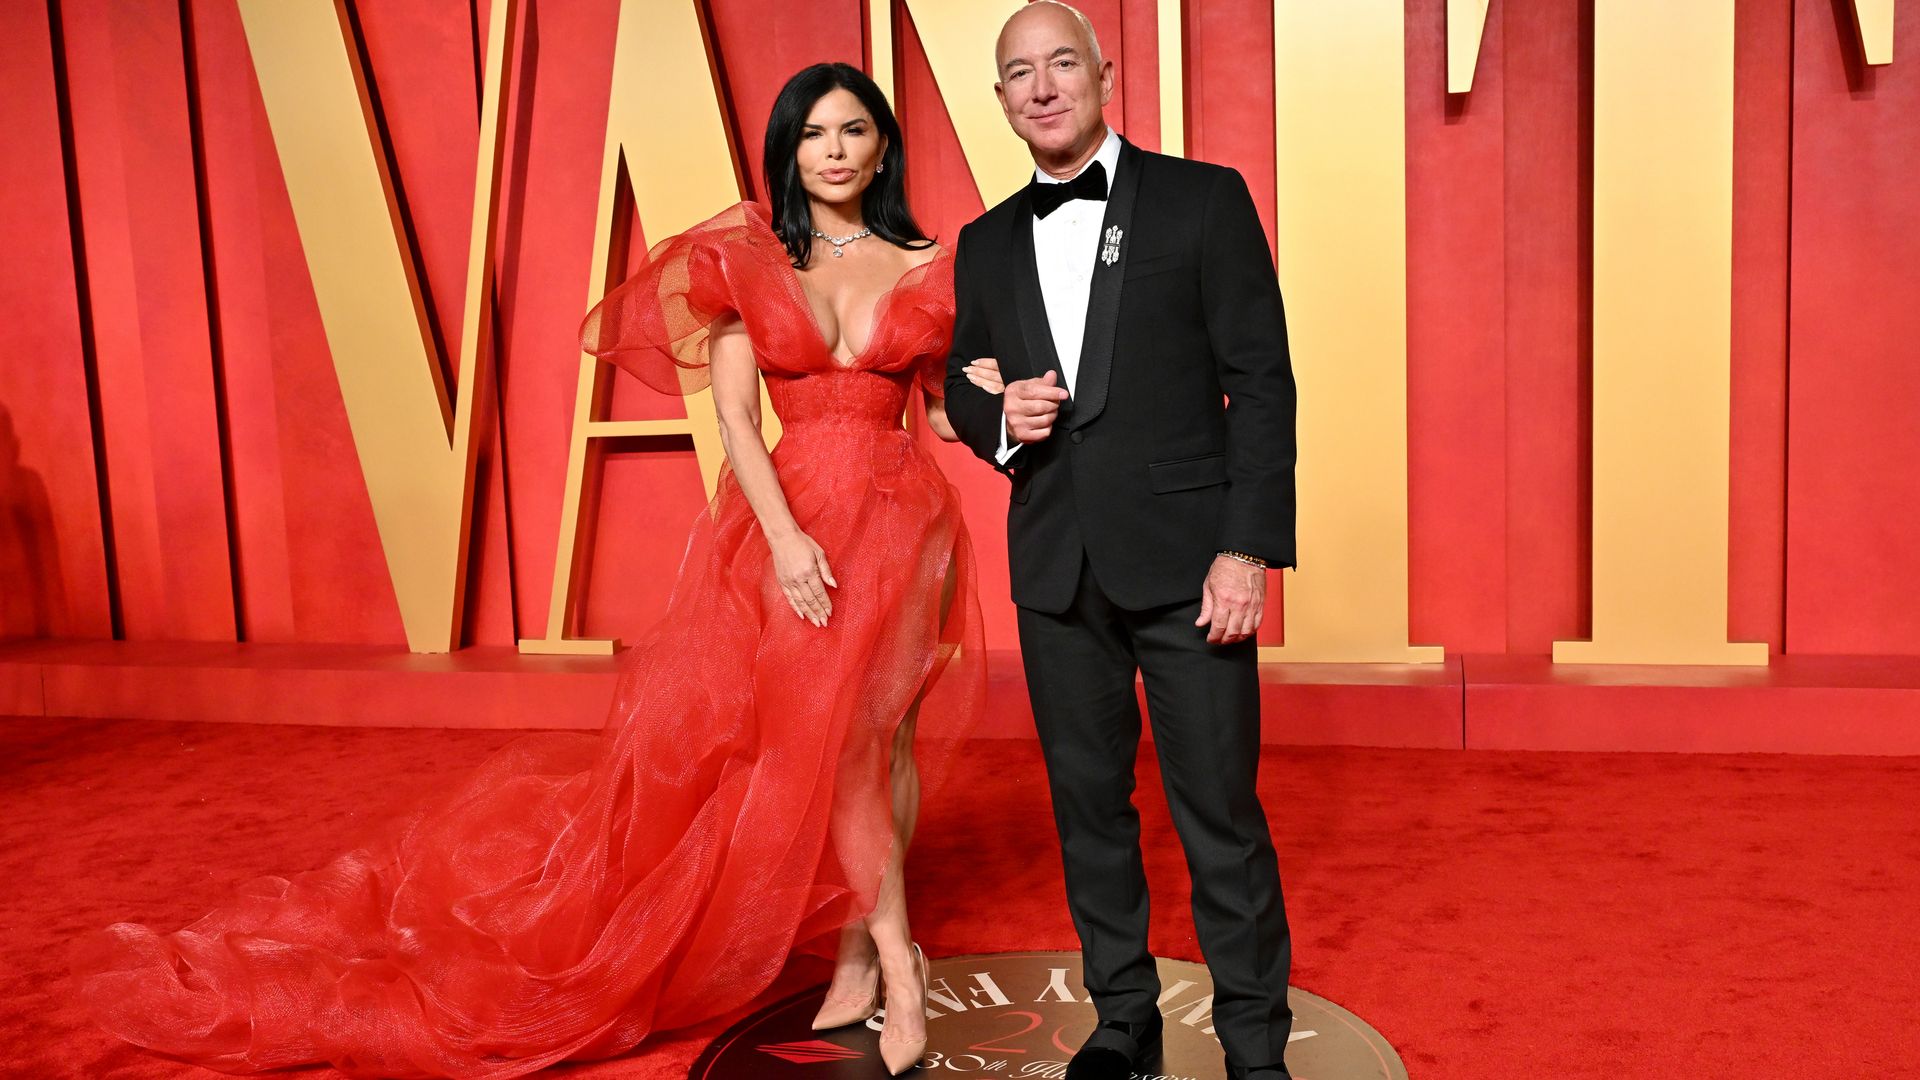 Lauren Sanchez in a red dress and Jeff Bezos in a tuxedo at the Vanity Fair party on the red carpet 